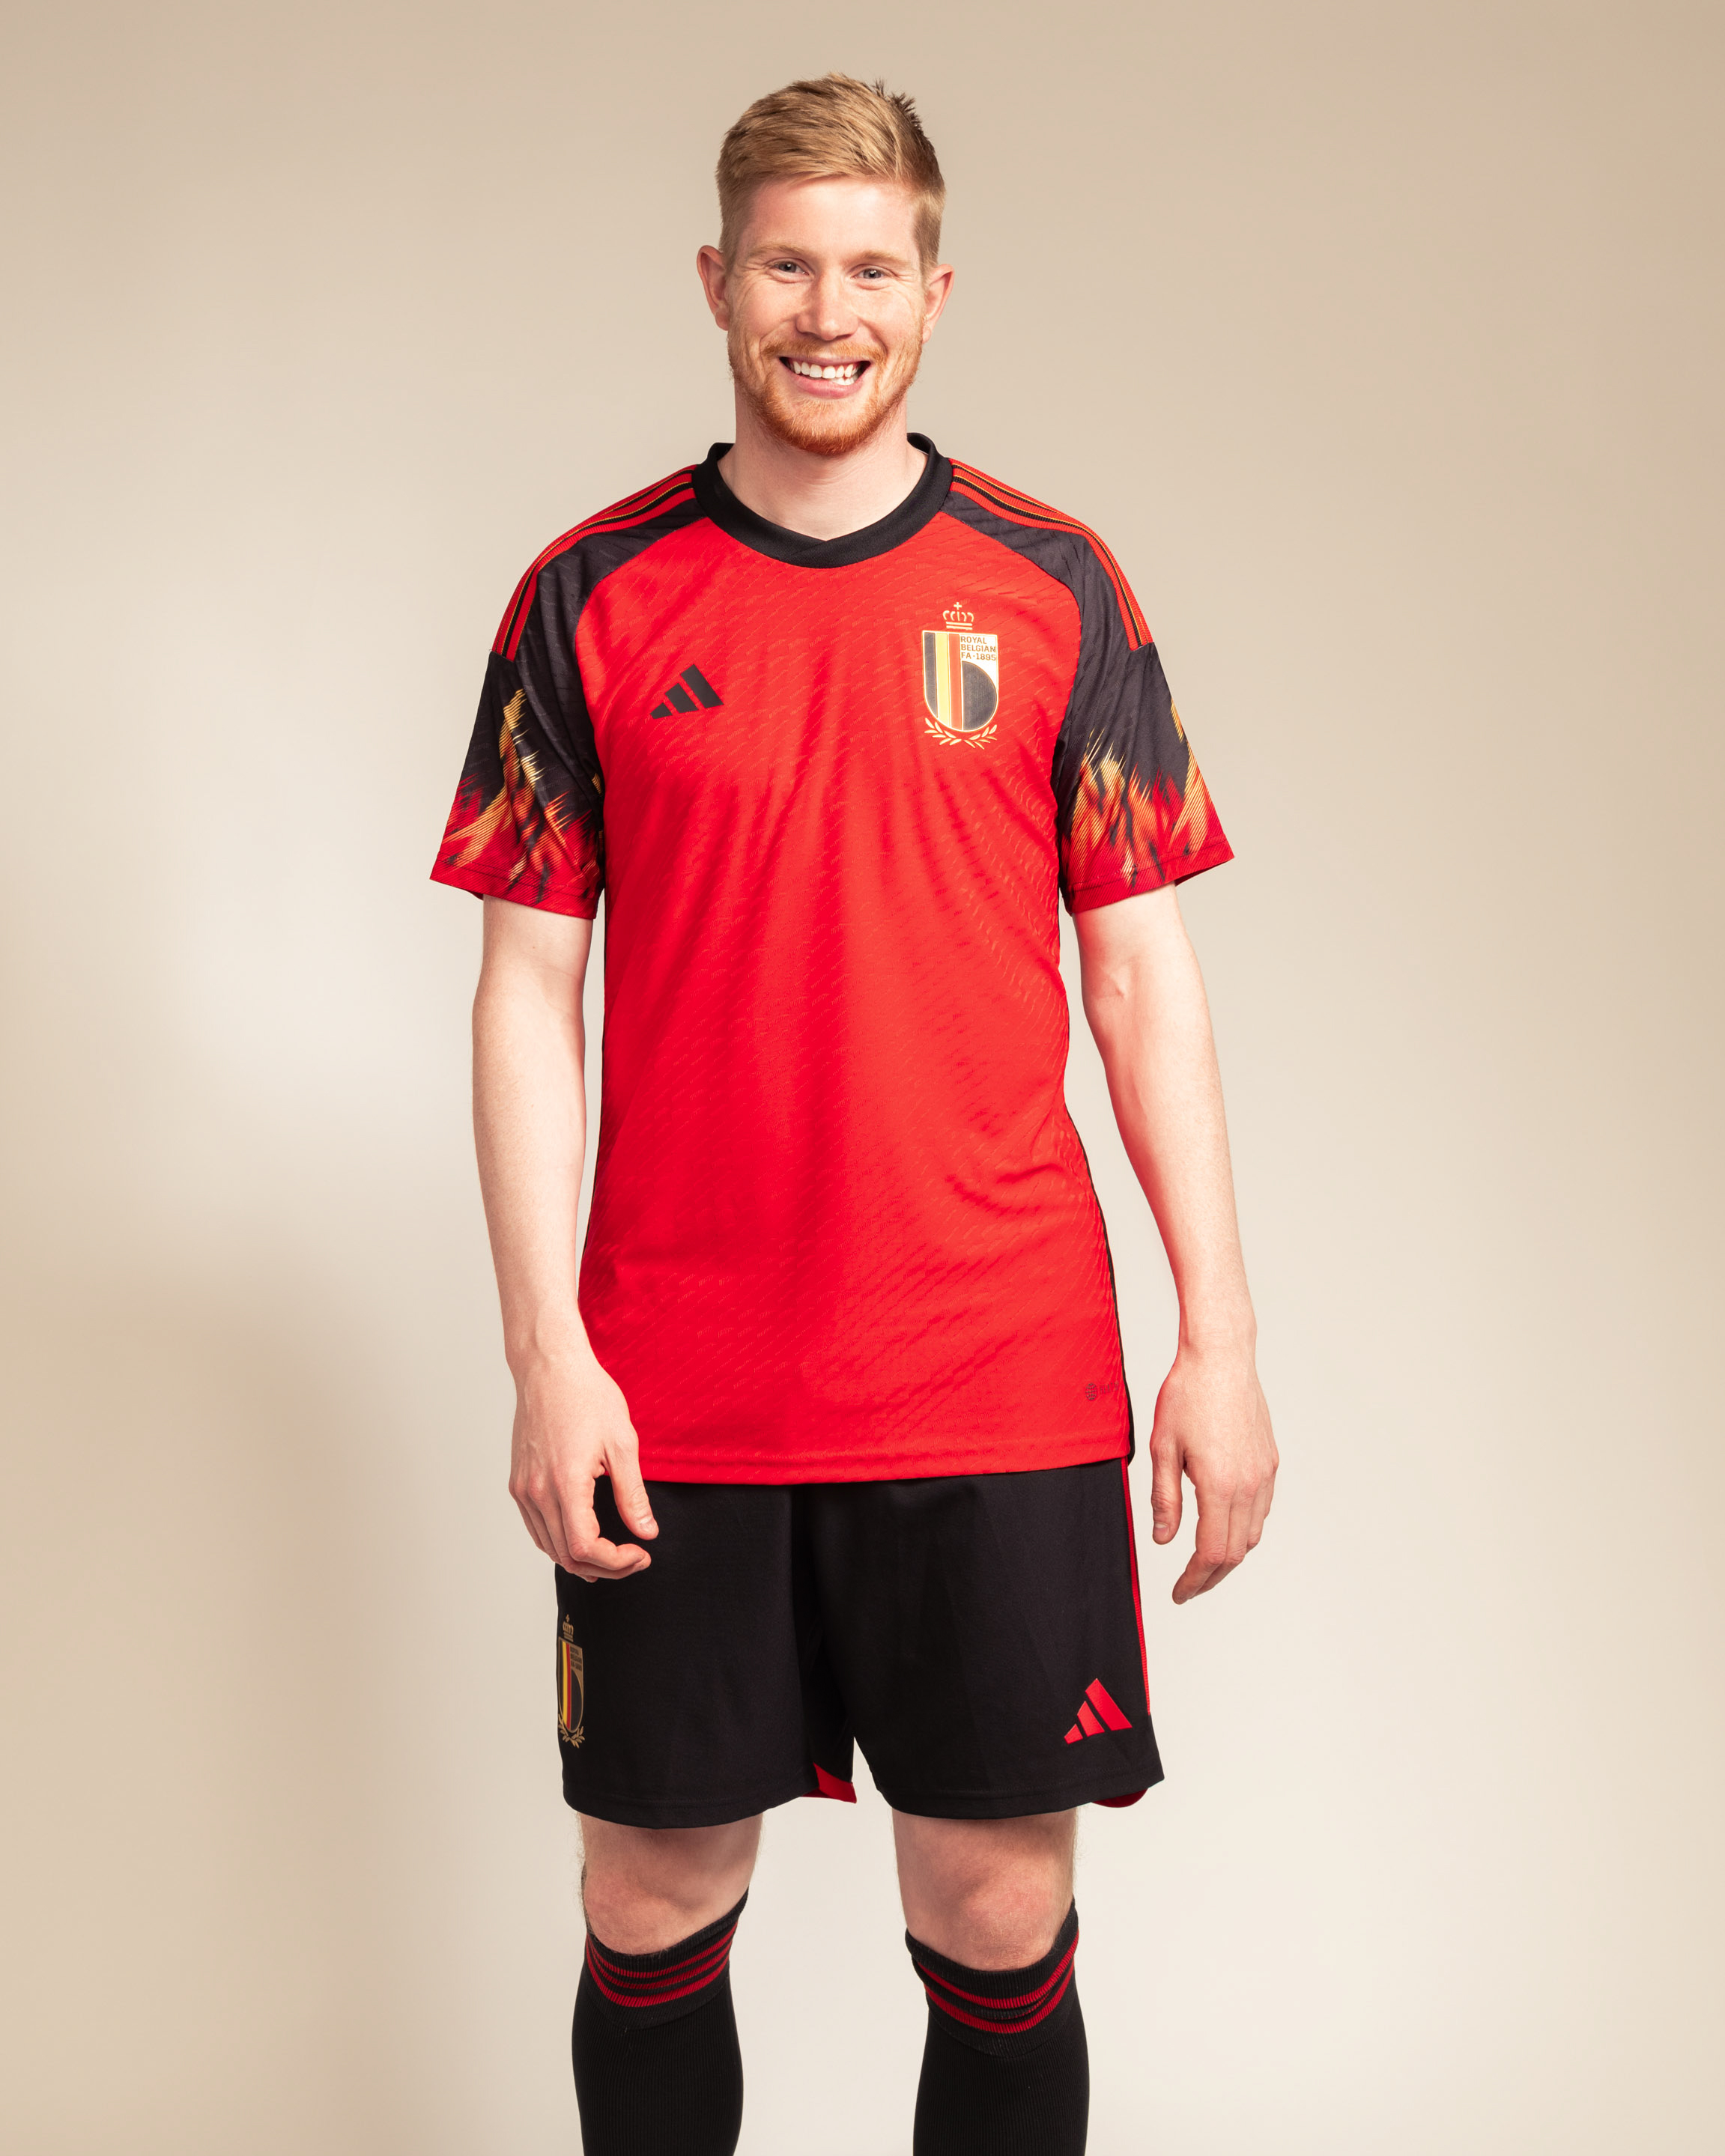 BELGIAN RED DEVILS MAKE STATEMENT OF LOVE WITH NEW AWAY KIT – Cult